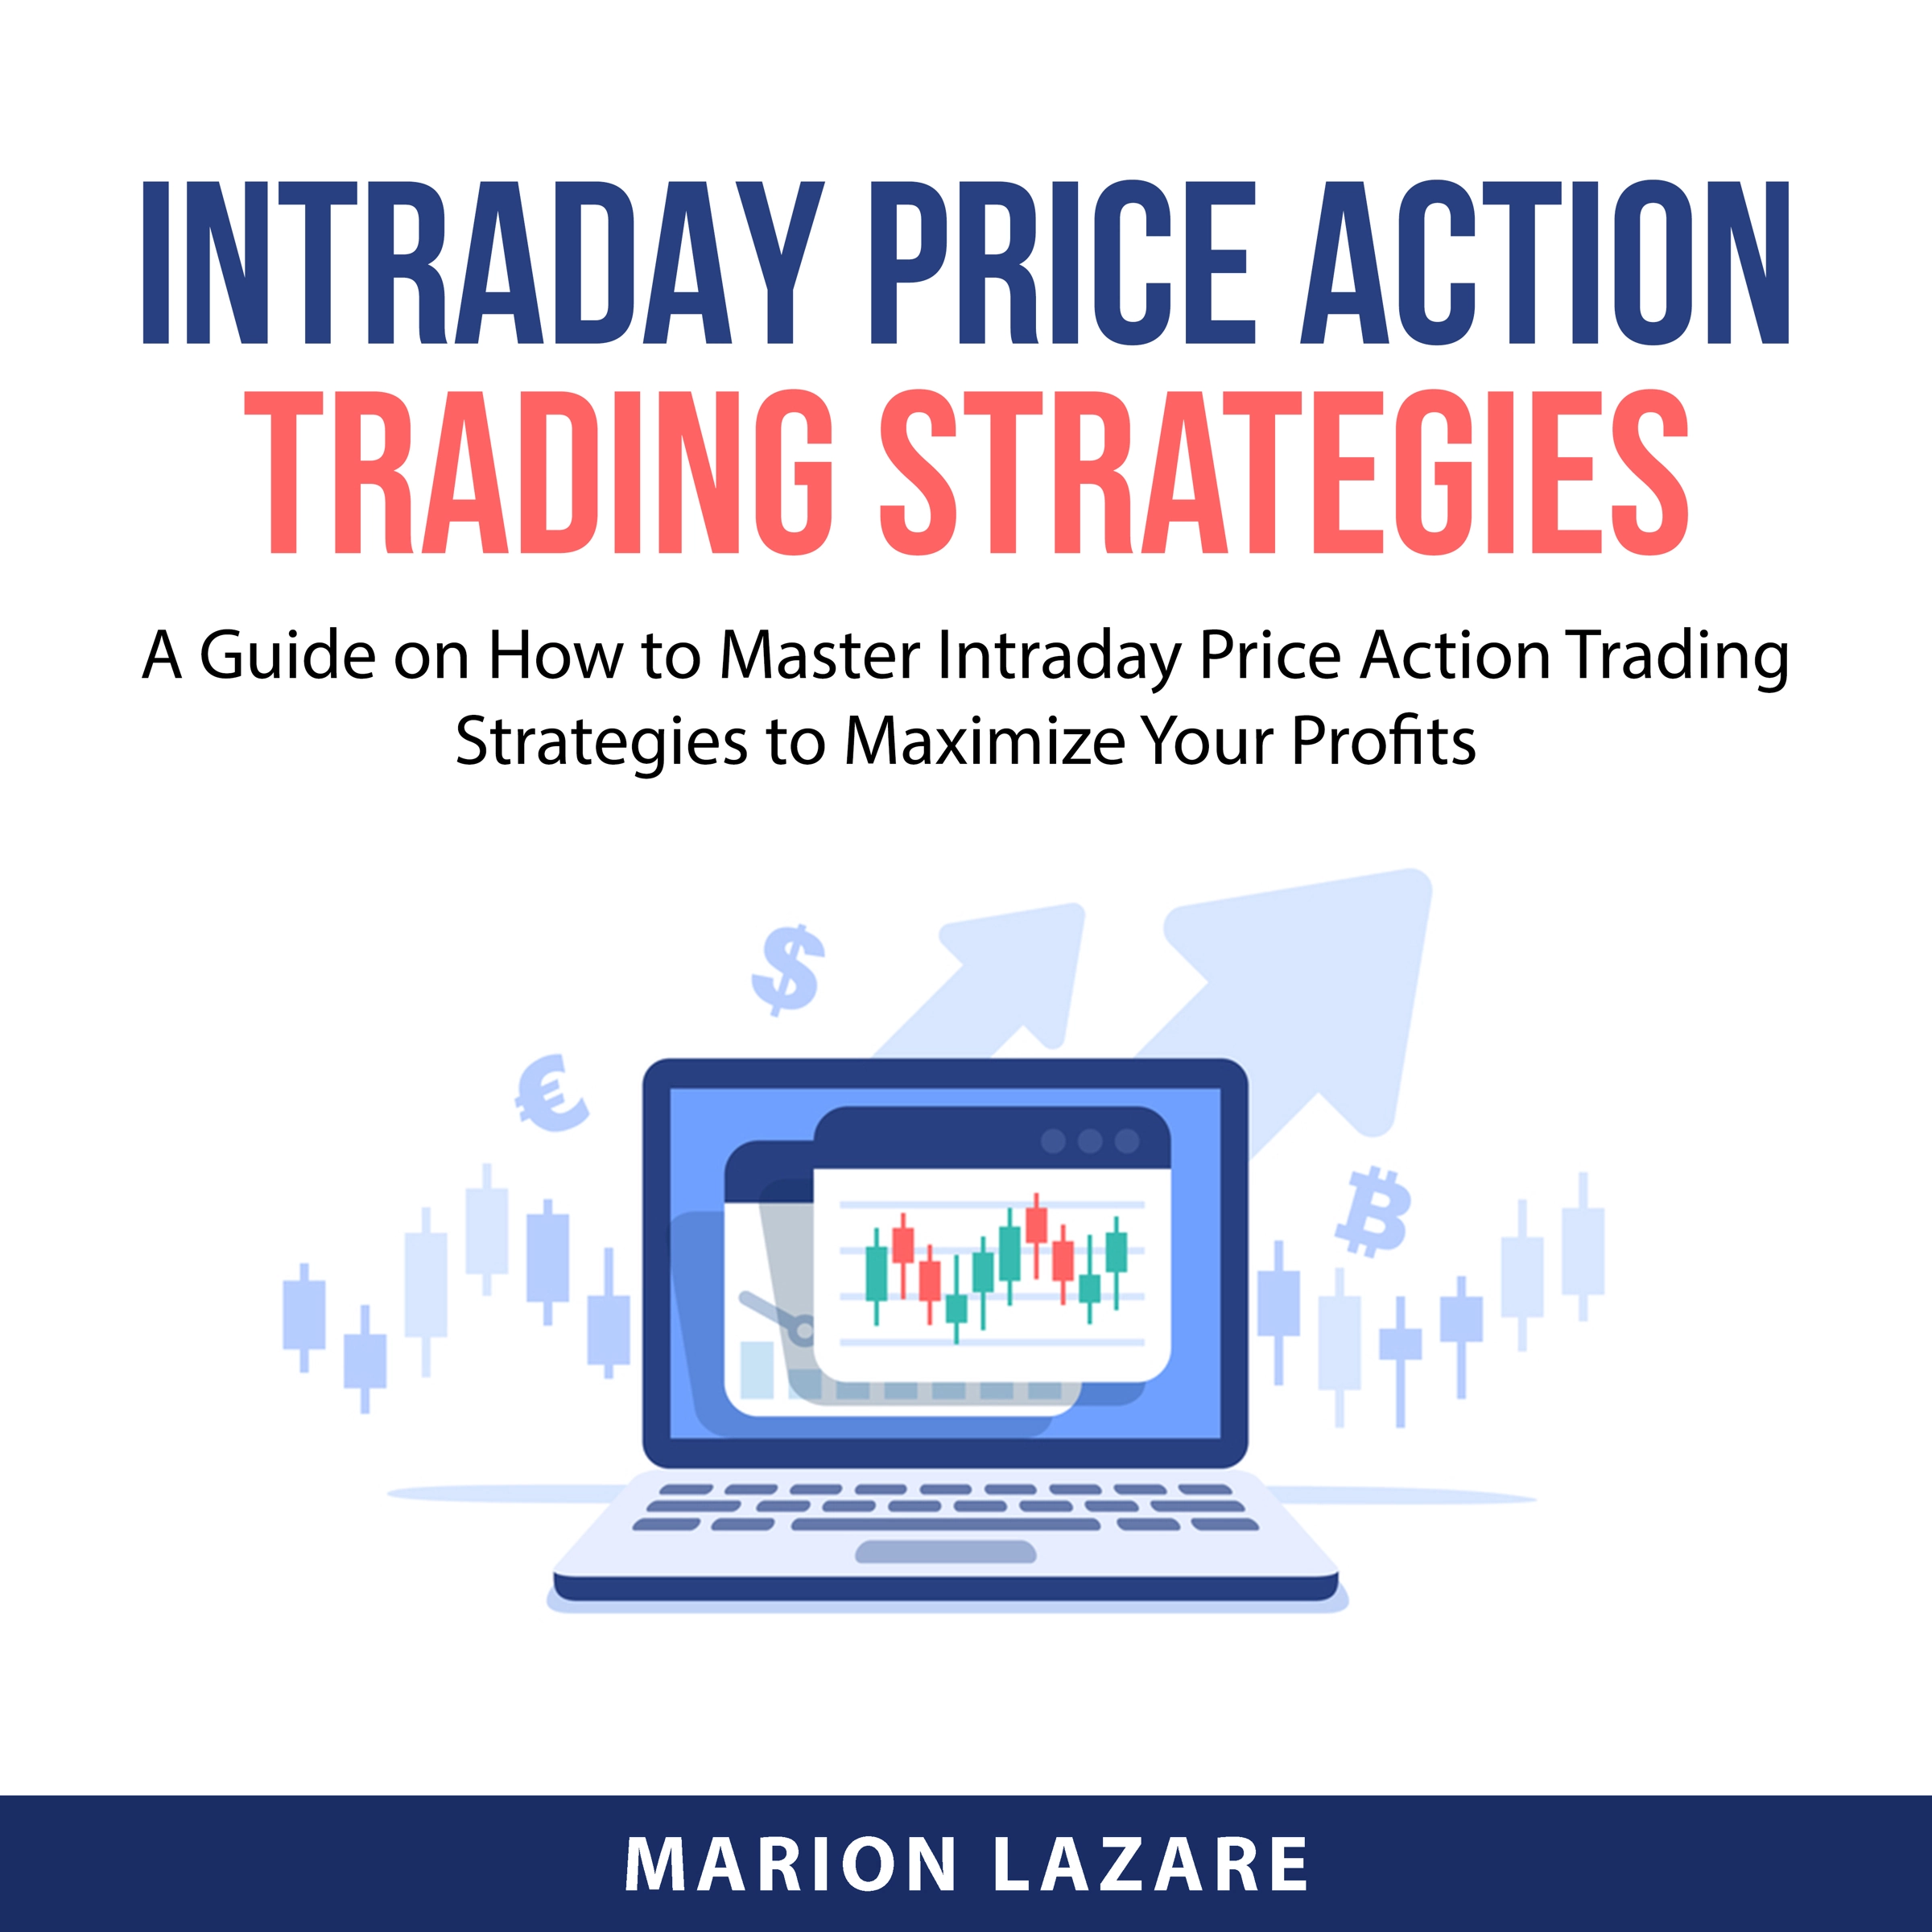 Intraday Price Action Trading Strategies by Marion Lazare Audiobook